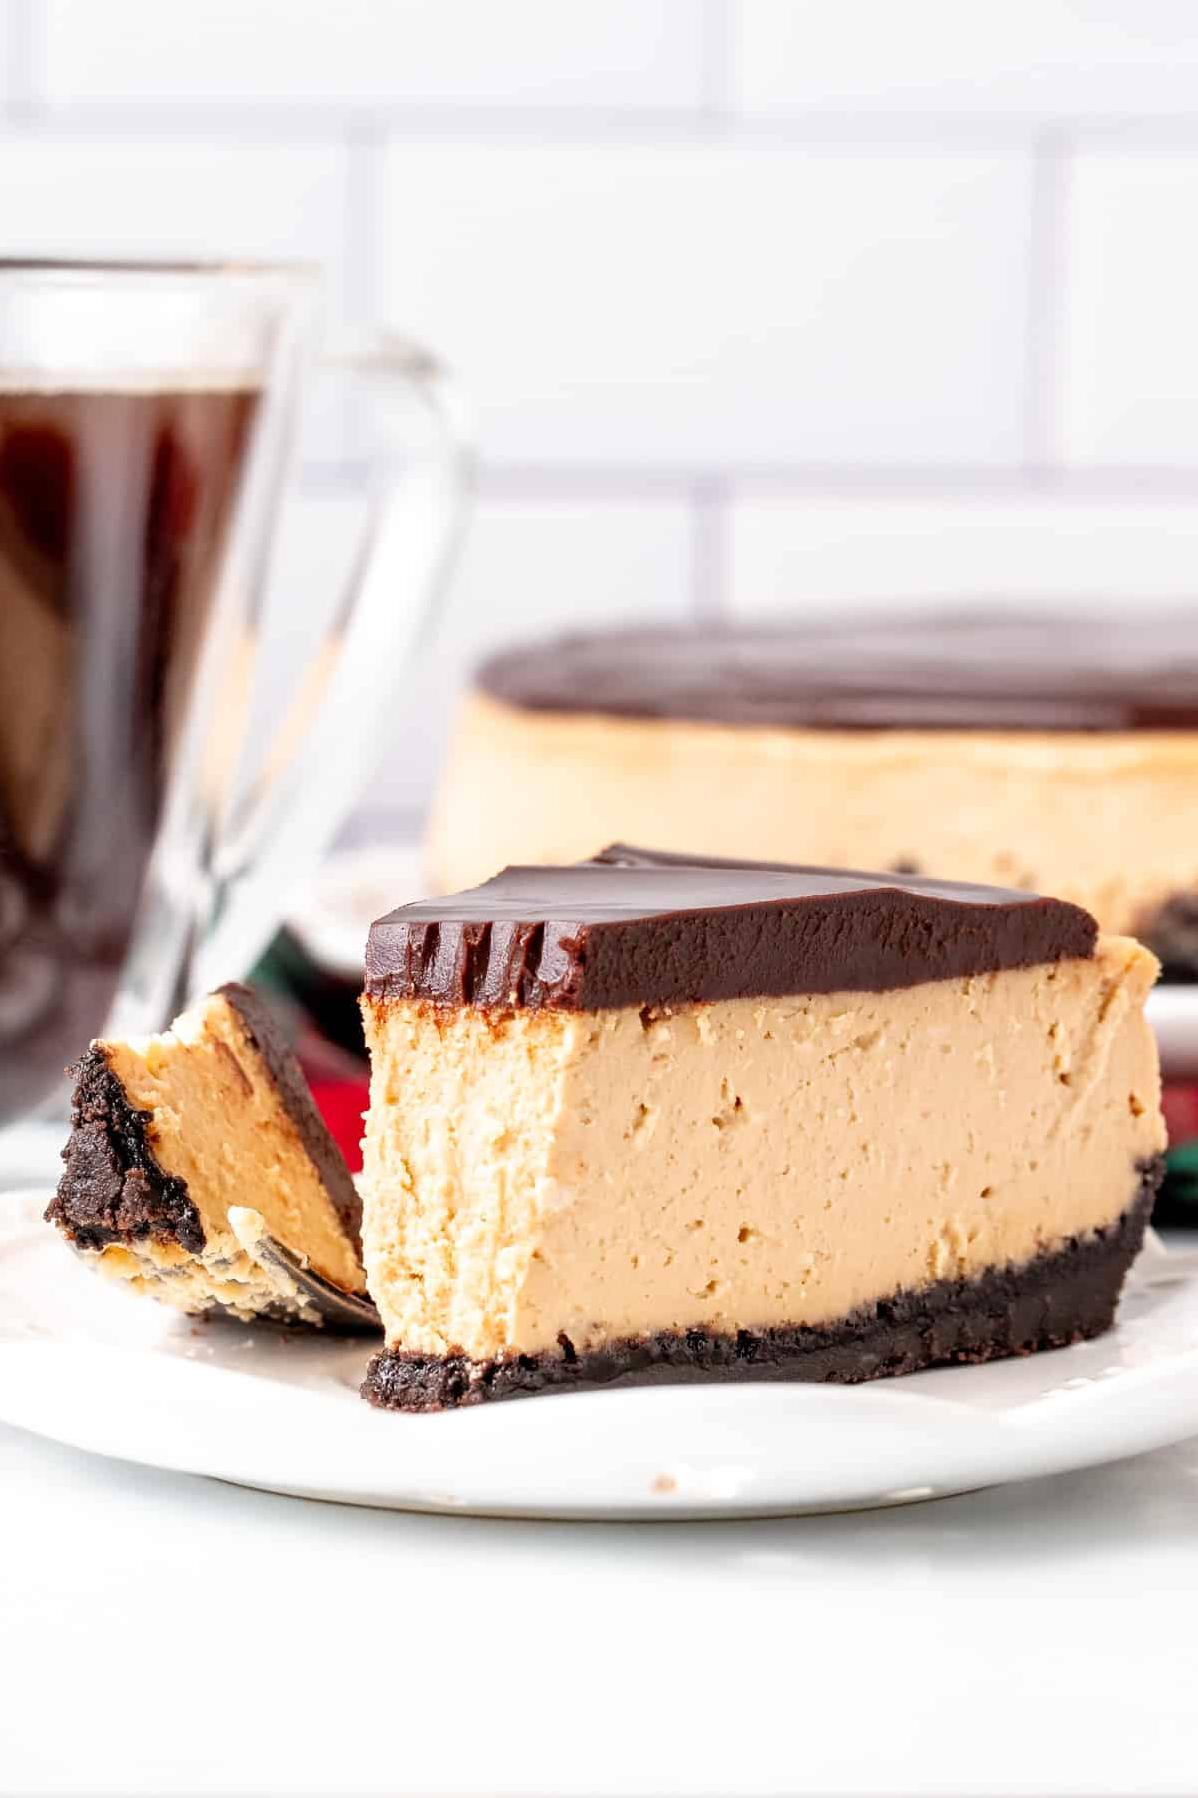  Coffee lovers, rejoice! This cheesecake will satisfy your deepest cravings.